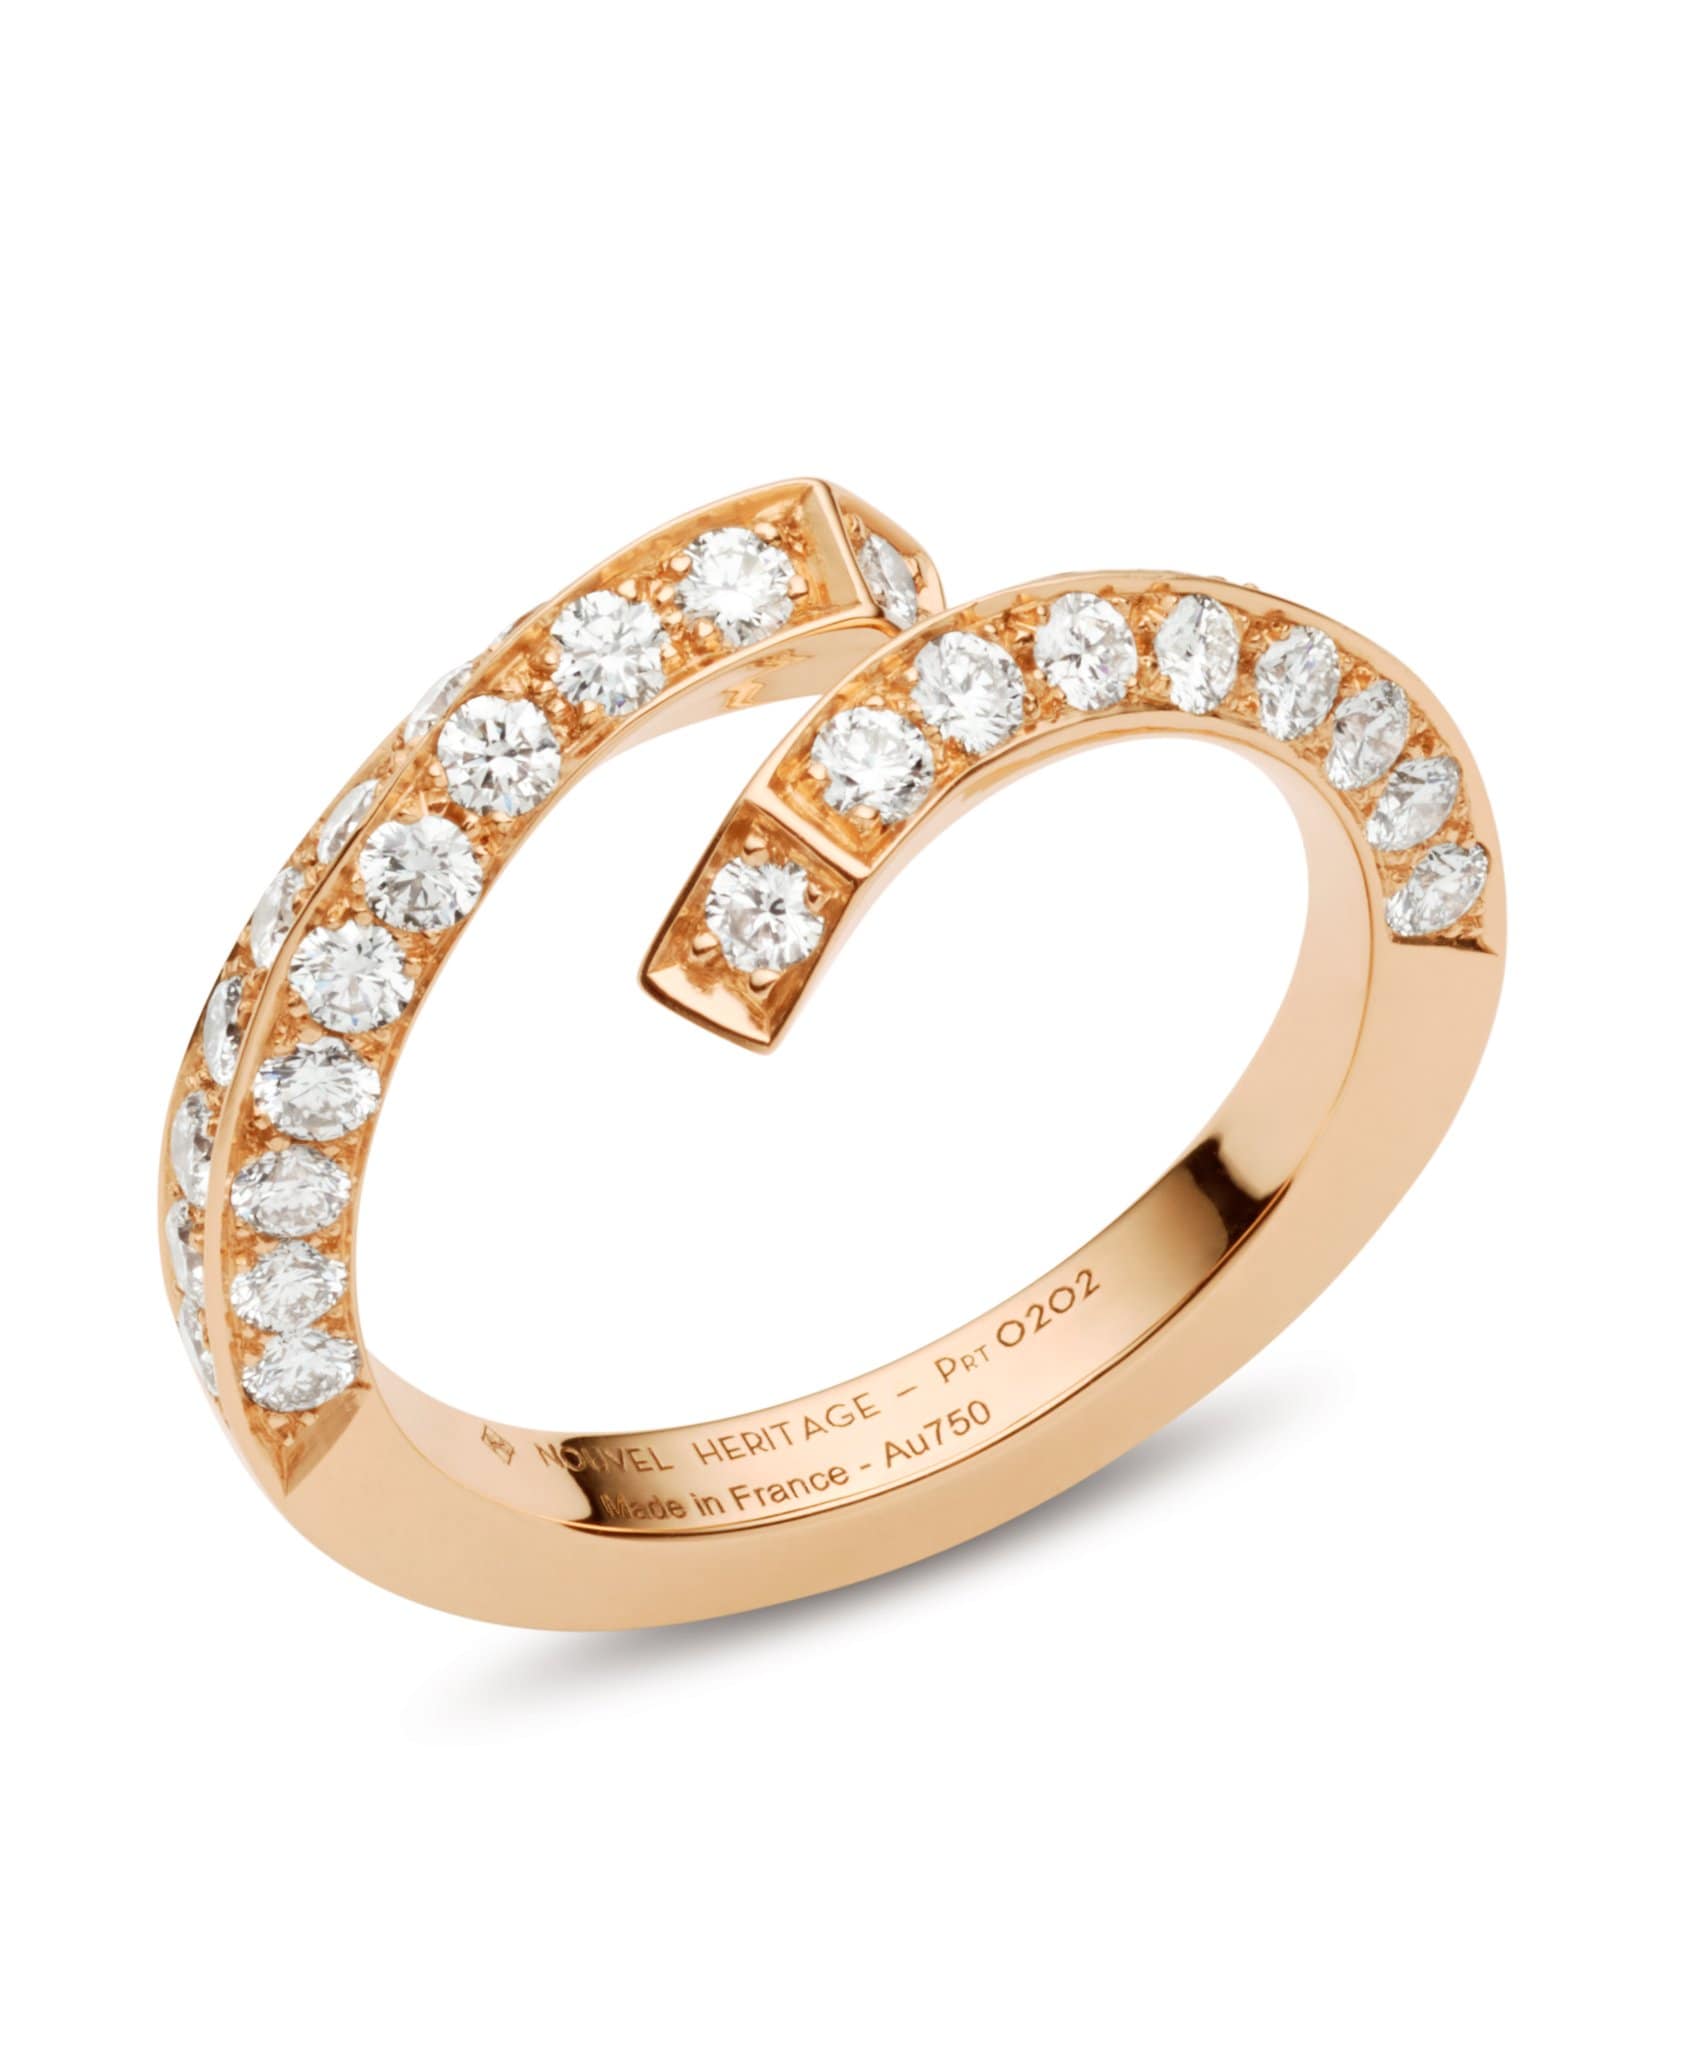 Diamond Thread Ring: Discover Luxury Fine Jewelry | Nouvel Heritage || Rose Gold